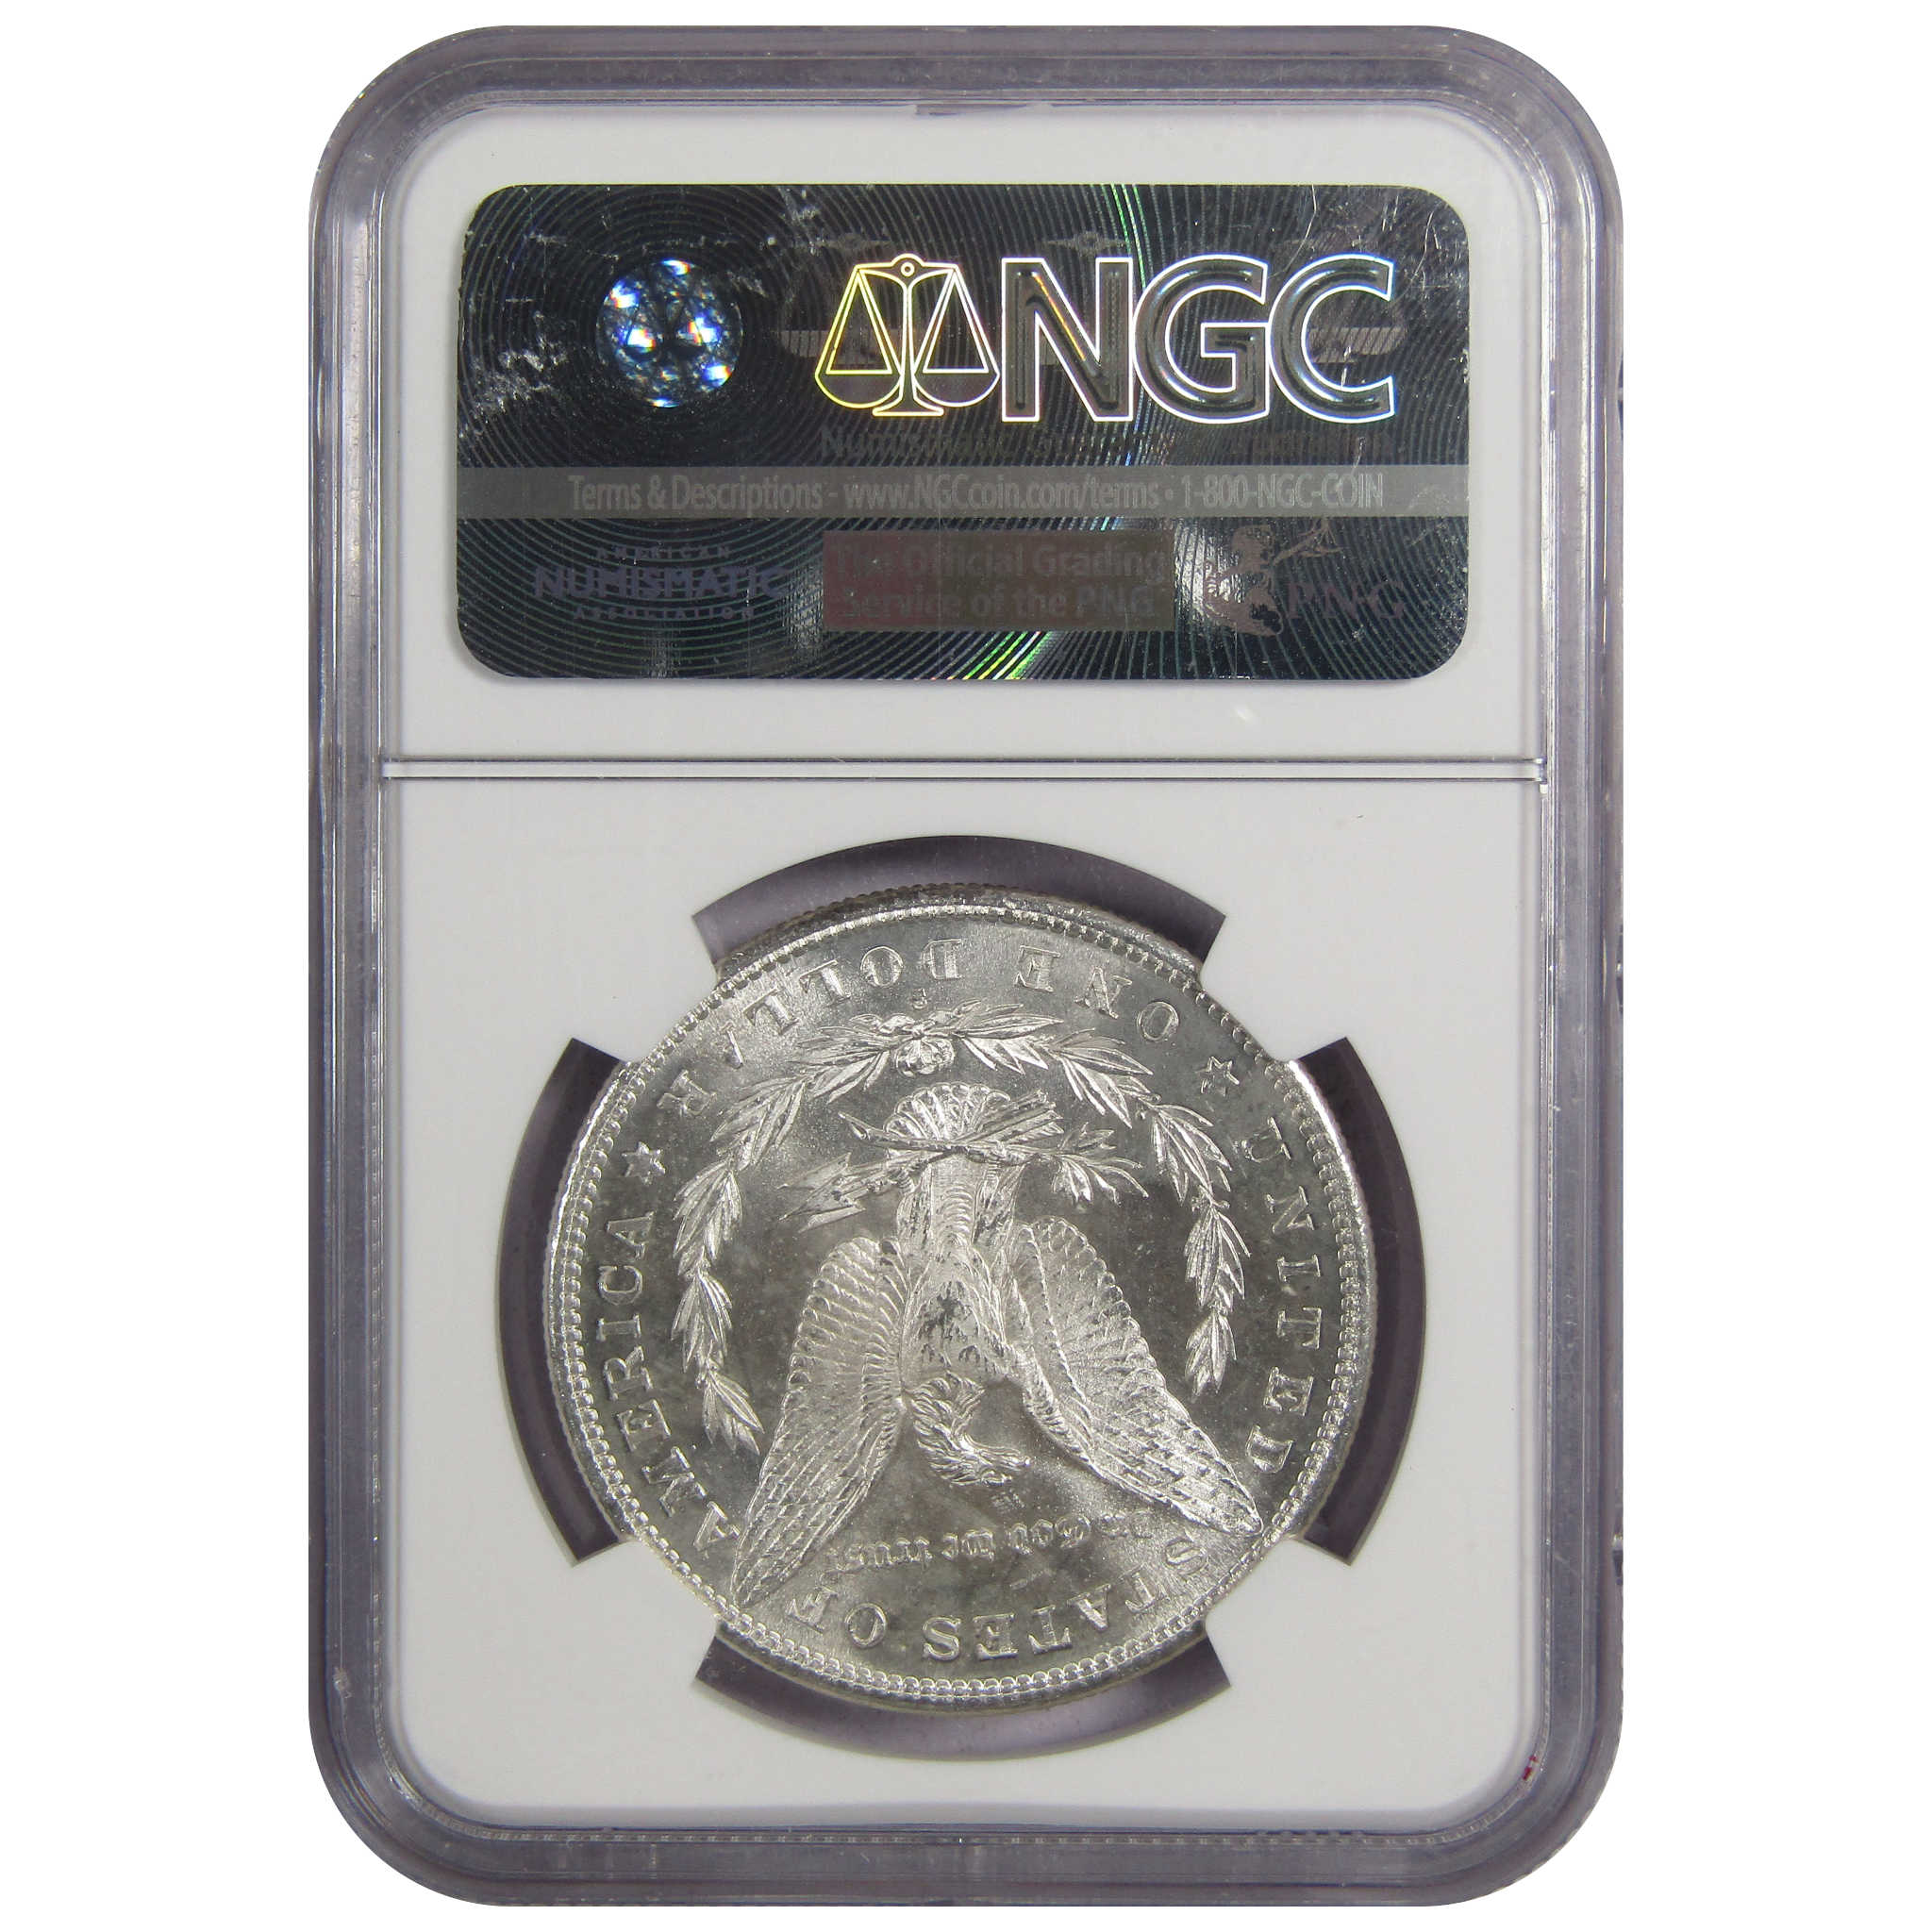 1881 S Morgan Dollar MS 67 NGC 90% Silver Uncirculated SKU:IPC7197 - Morgan coin - Morgan silver dollar - Morgan silver dollar for sale - Profile Coins &amp; Collectibles